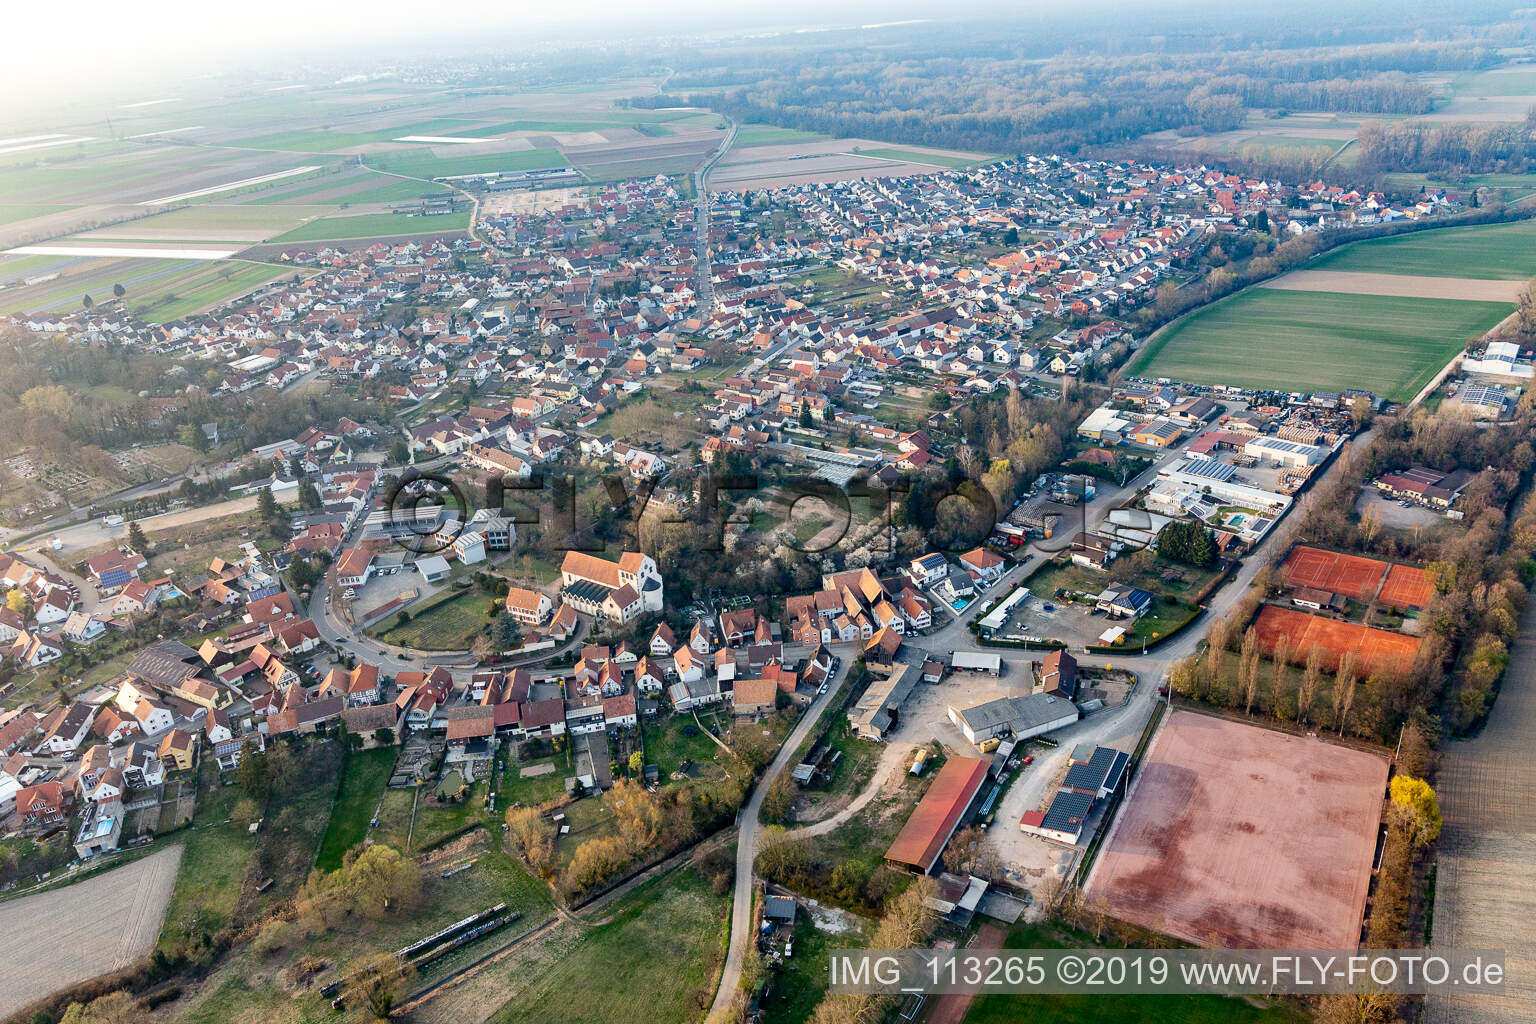 Drone image of Hördt in the state Rhineland-Palatinate, Germany